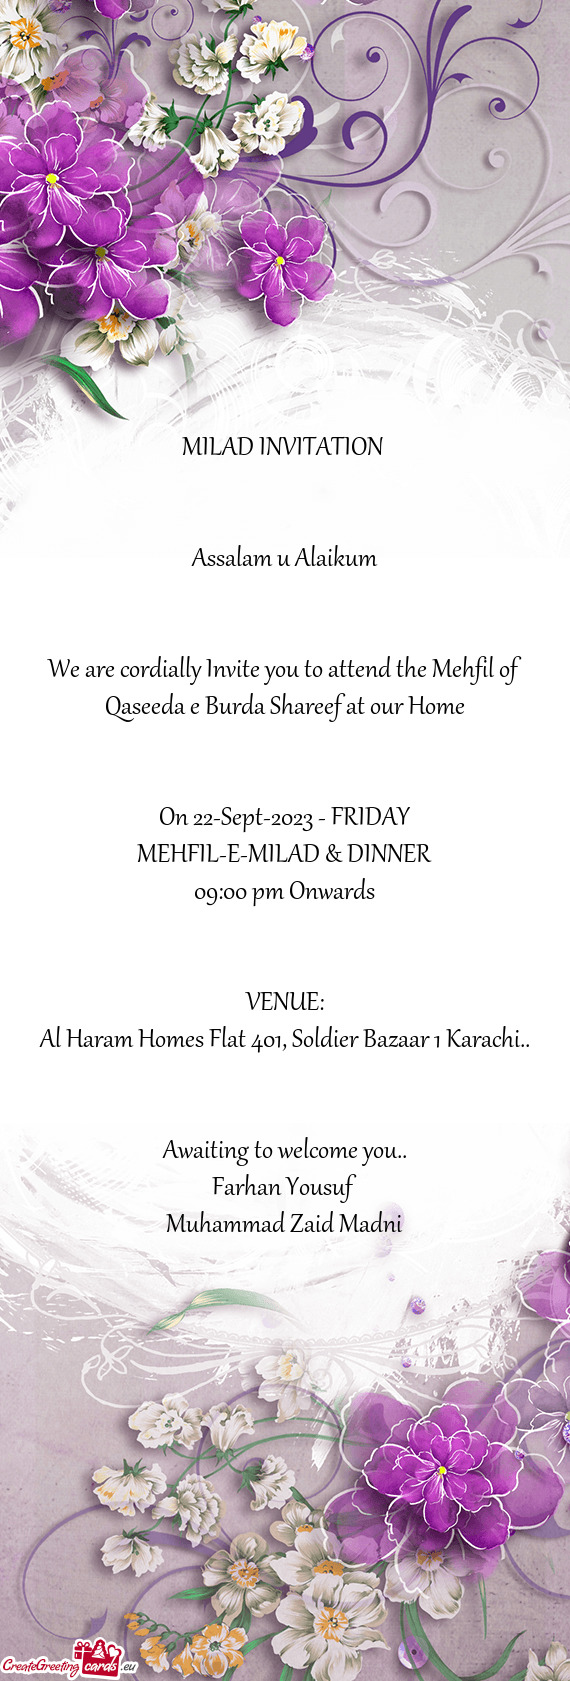 We are cordially Invite you to attend the Mehfil of Qaseeda e Burda Shareef at our Home